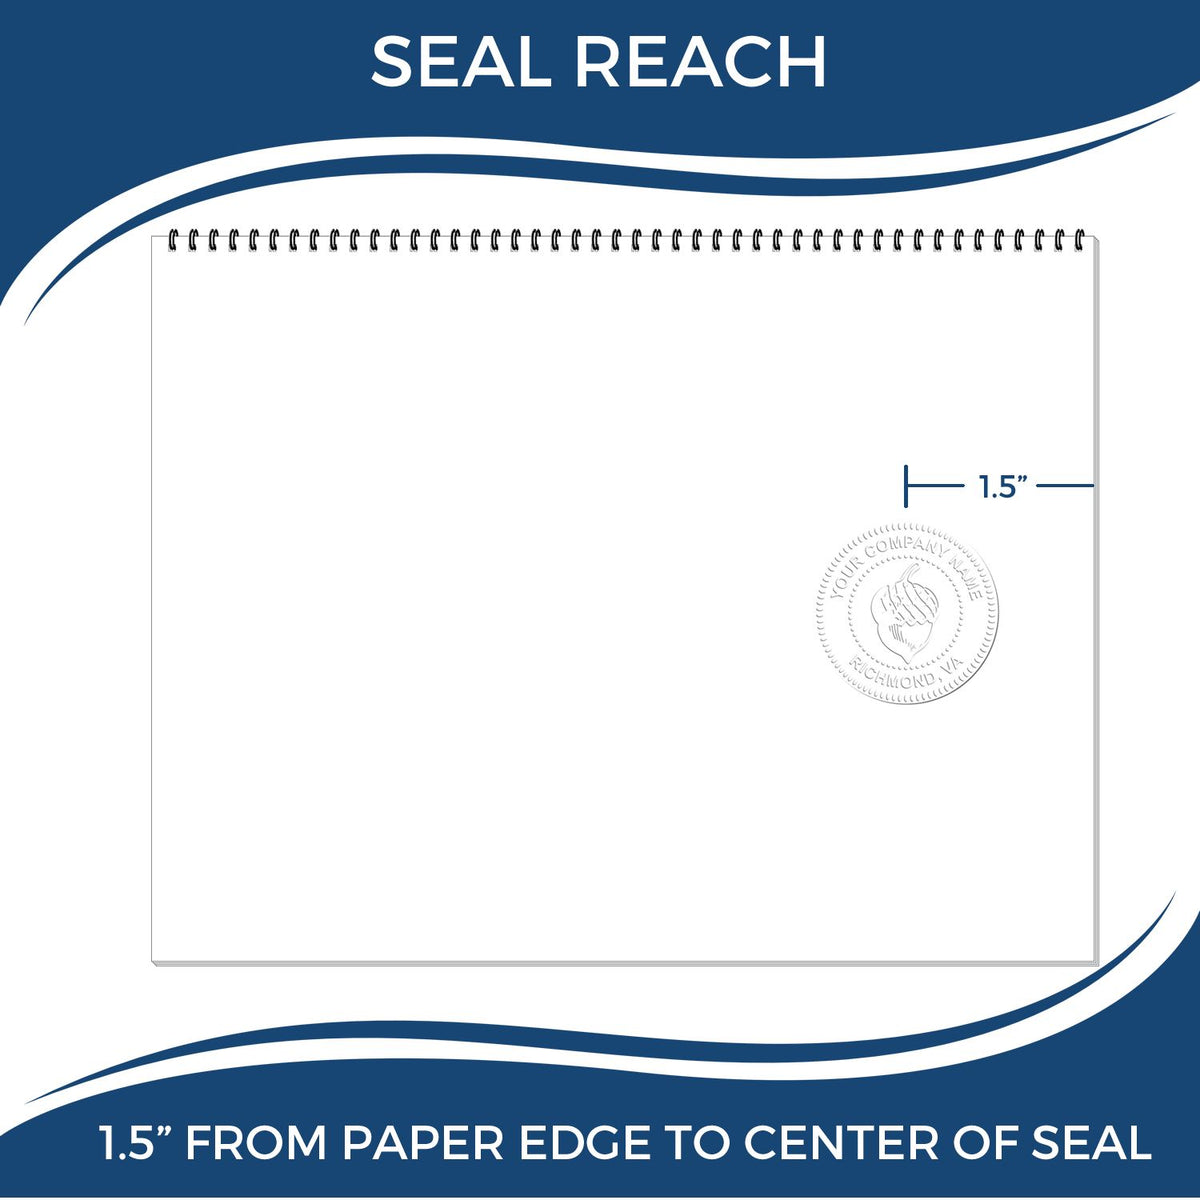 An infographic showing the seal reach which is represented by a ruler and a miniature seal image of the Texas Engineer Desk Seal